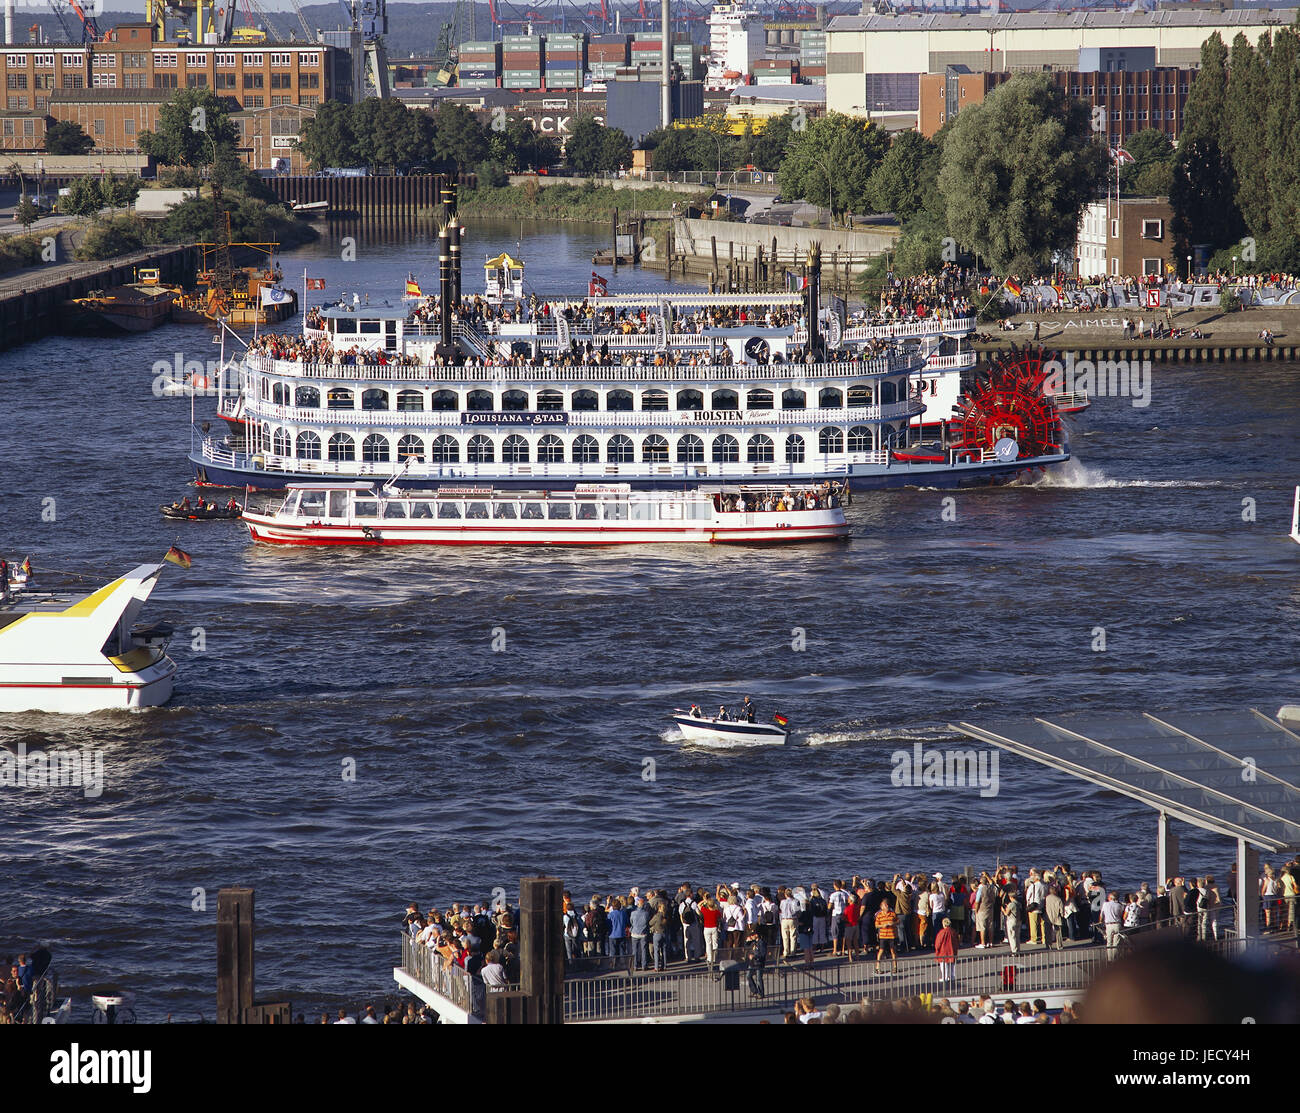 Germany, Hamburg, the Elbe, radian steamboat 'Louisiana of glaucoma', tourists, no model release, town, memory town, river, radian steamboat, tourism, attraction, excursion, ship excursion, navigation, person, Stock Photo